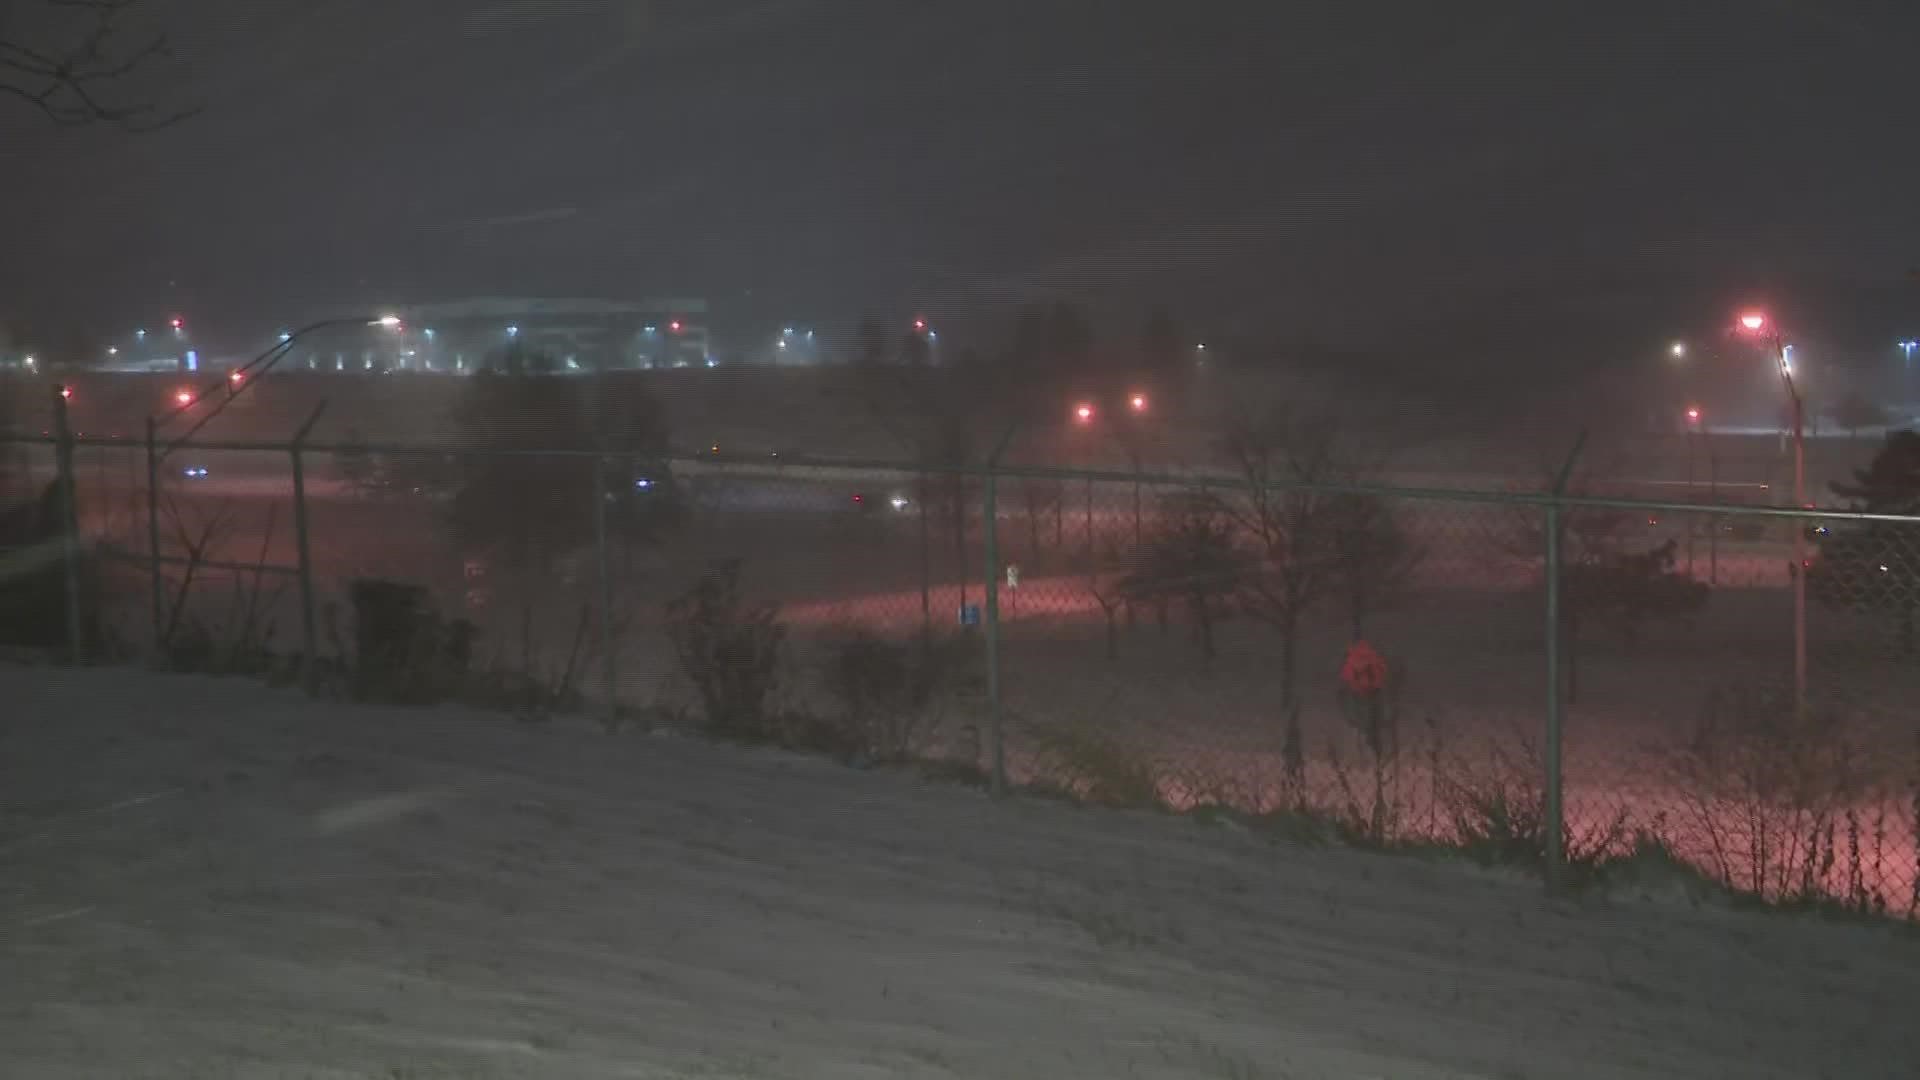 3News has live coverage as Northeast Ohio gets hit with a winter storm ahead of the holiday weekend.